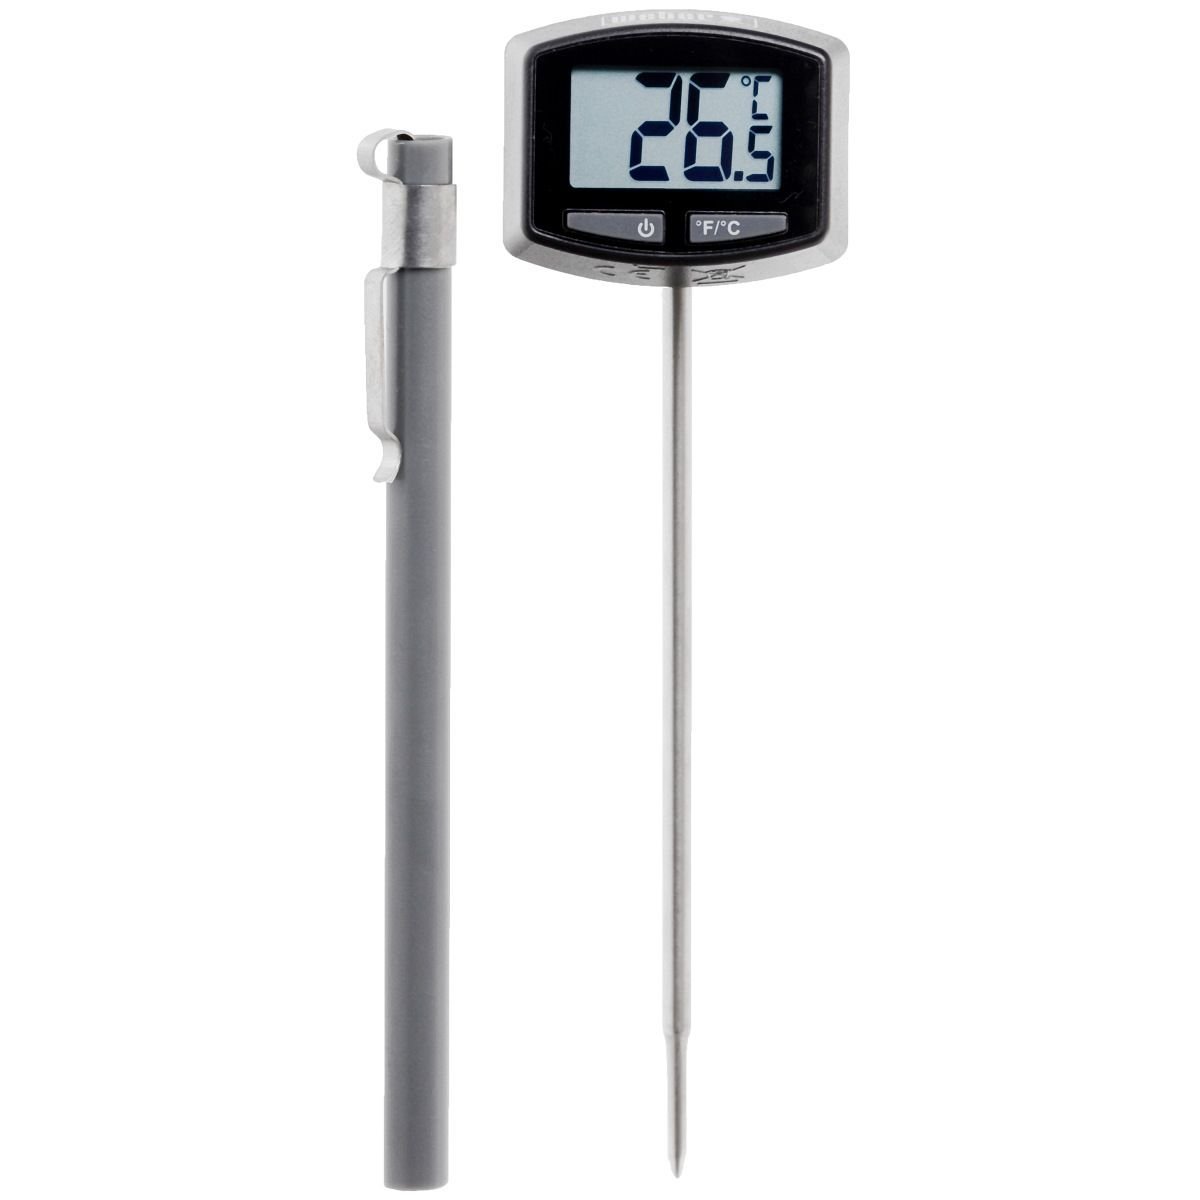 Meat Thermometer by Weber from Amazon.com